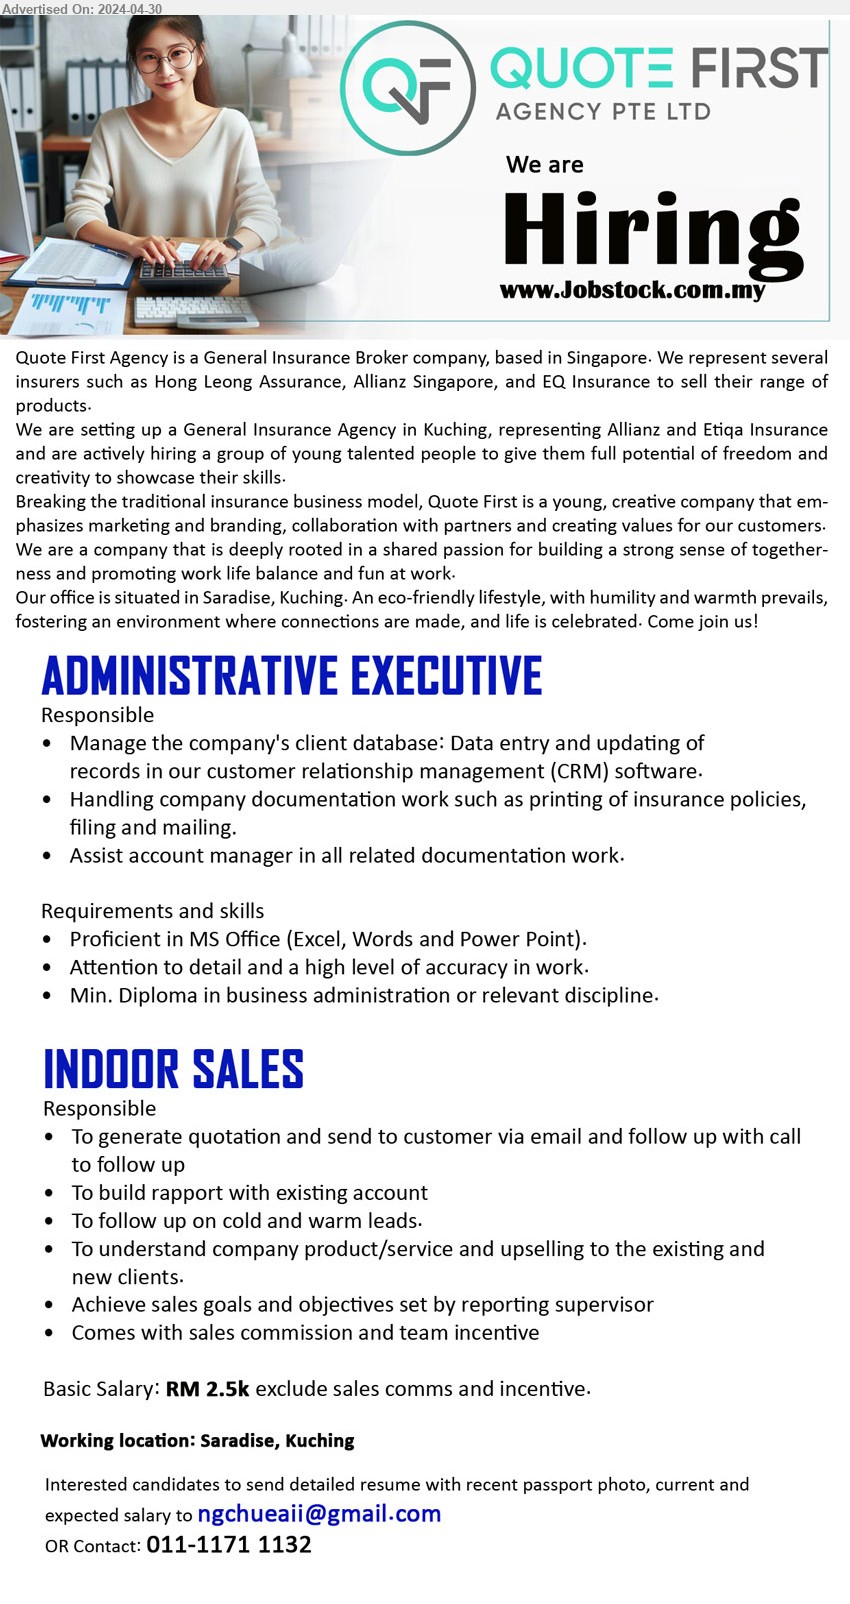 QUOTE FIRST AGENCY - 1. ADMINISTRATIVE EXECUTIVE  (Kuching), Diploma in Business Administration, Proficient in MS Office (Excel, Words and Power Point).,...
2. INDOOR SALES (Kuching), Basic Salary: RM 2.5k, To generate quotation and send to customer via email and follow up with call to follow up...
Contact: 011-1171 1132 / Email resume to ...